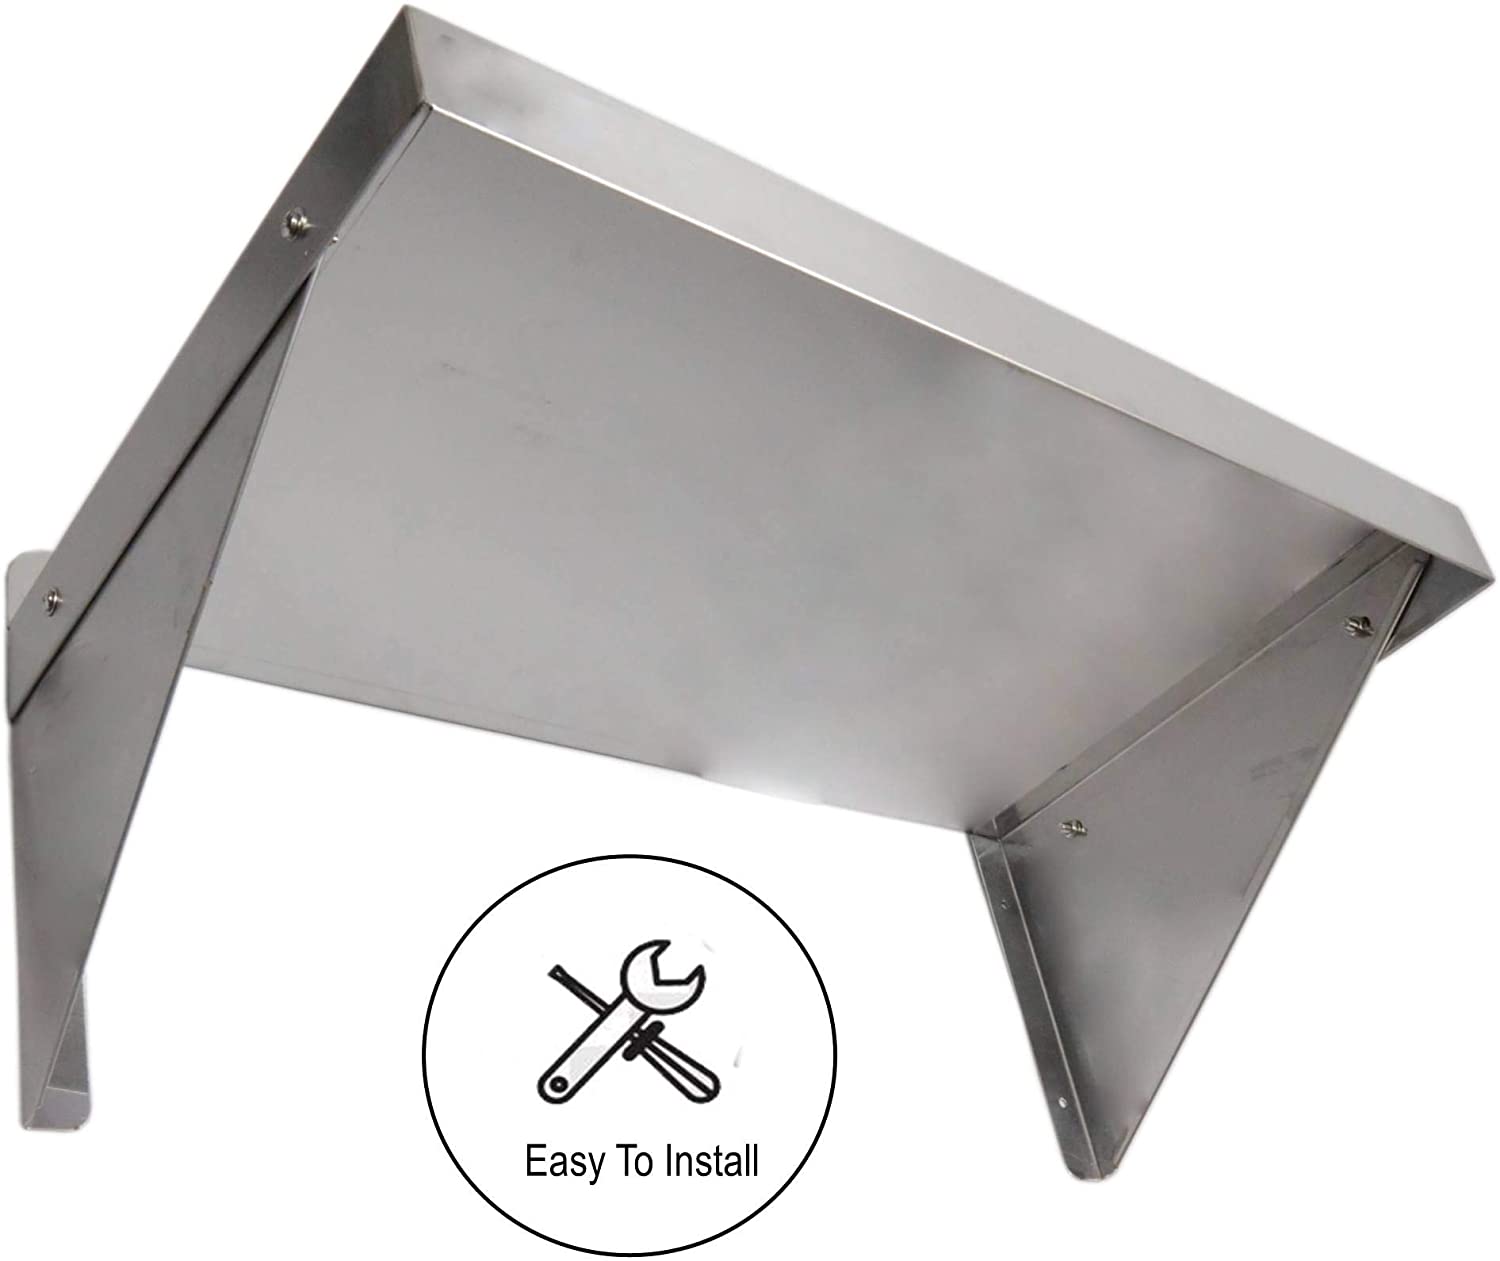 GSW Stainless Steel Commercial Wall Mount Shelf Industrial Appliance Equipment, Restaurant, Bar, Home, Kitchen, Laundry, Garage and Utility Room (14" Depth)